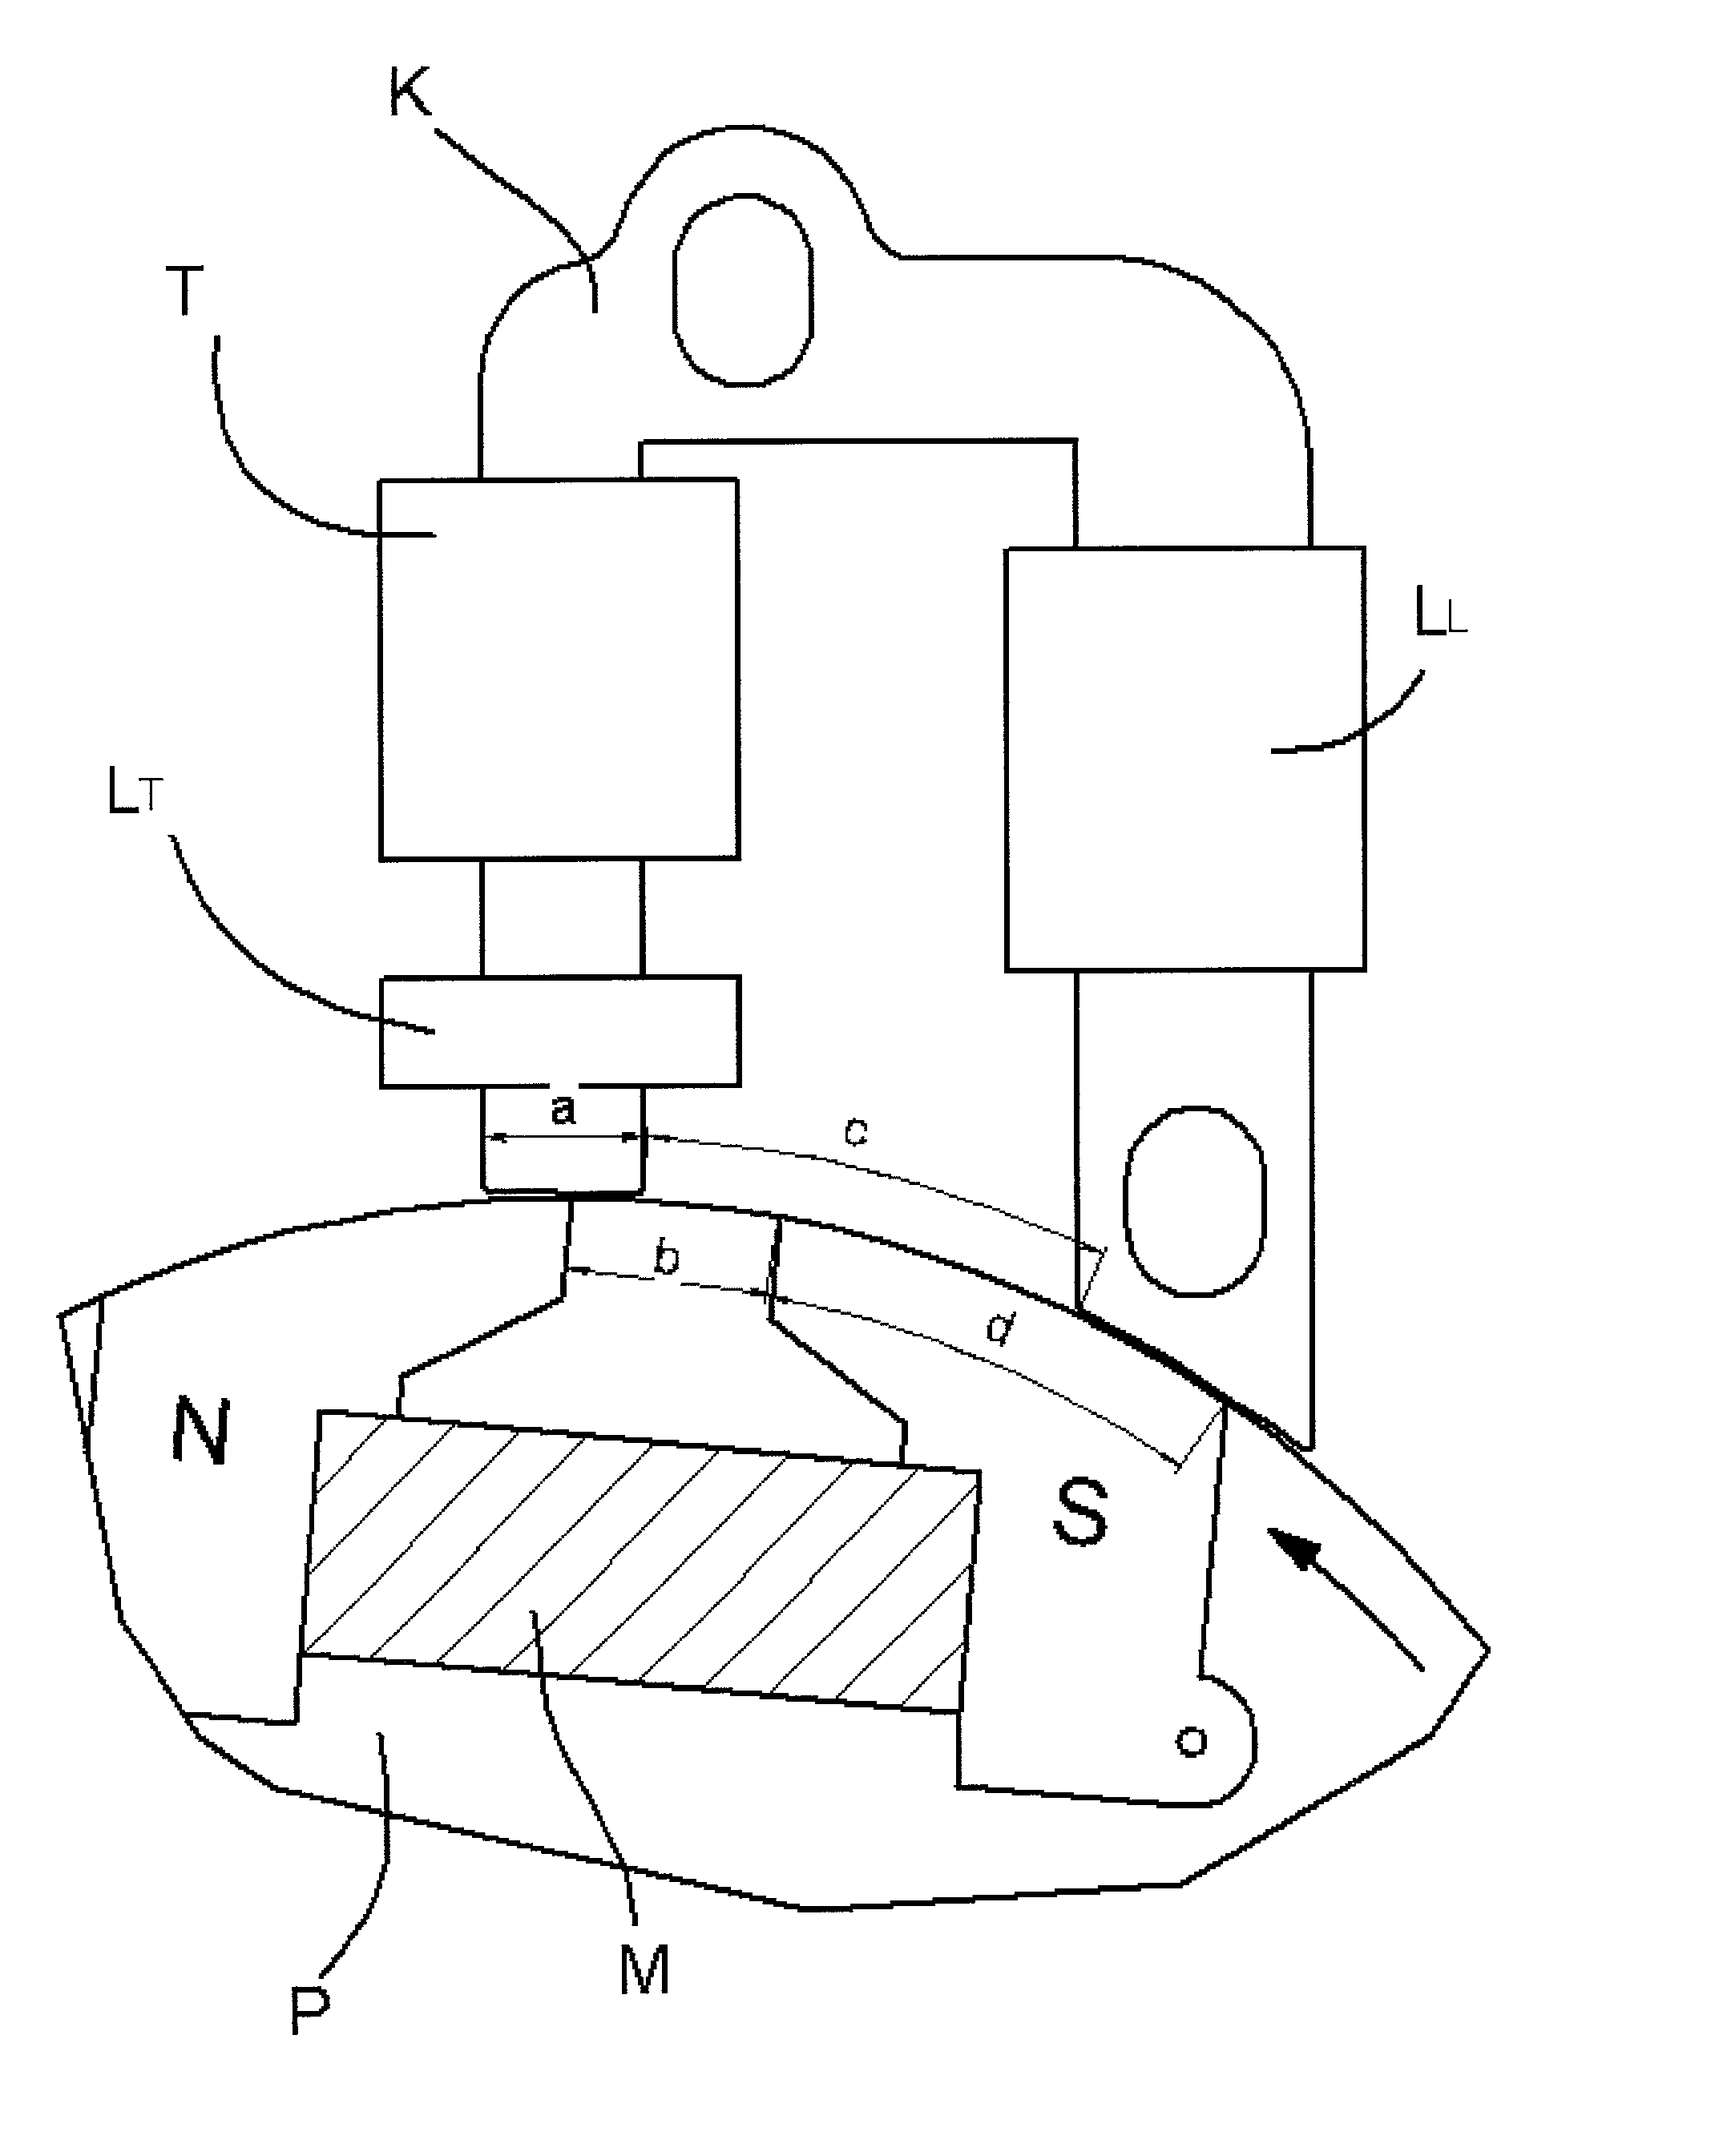 Rotation direction detector in ignition equipment of an internal combustion engine